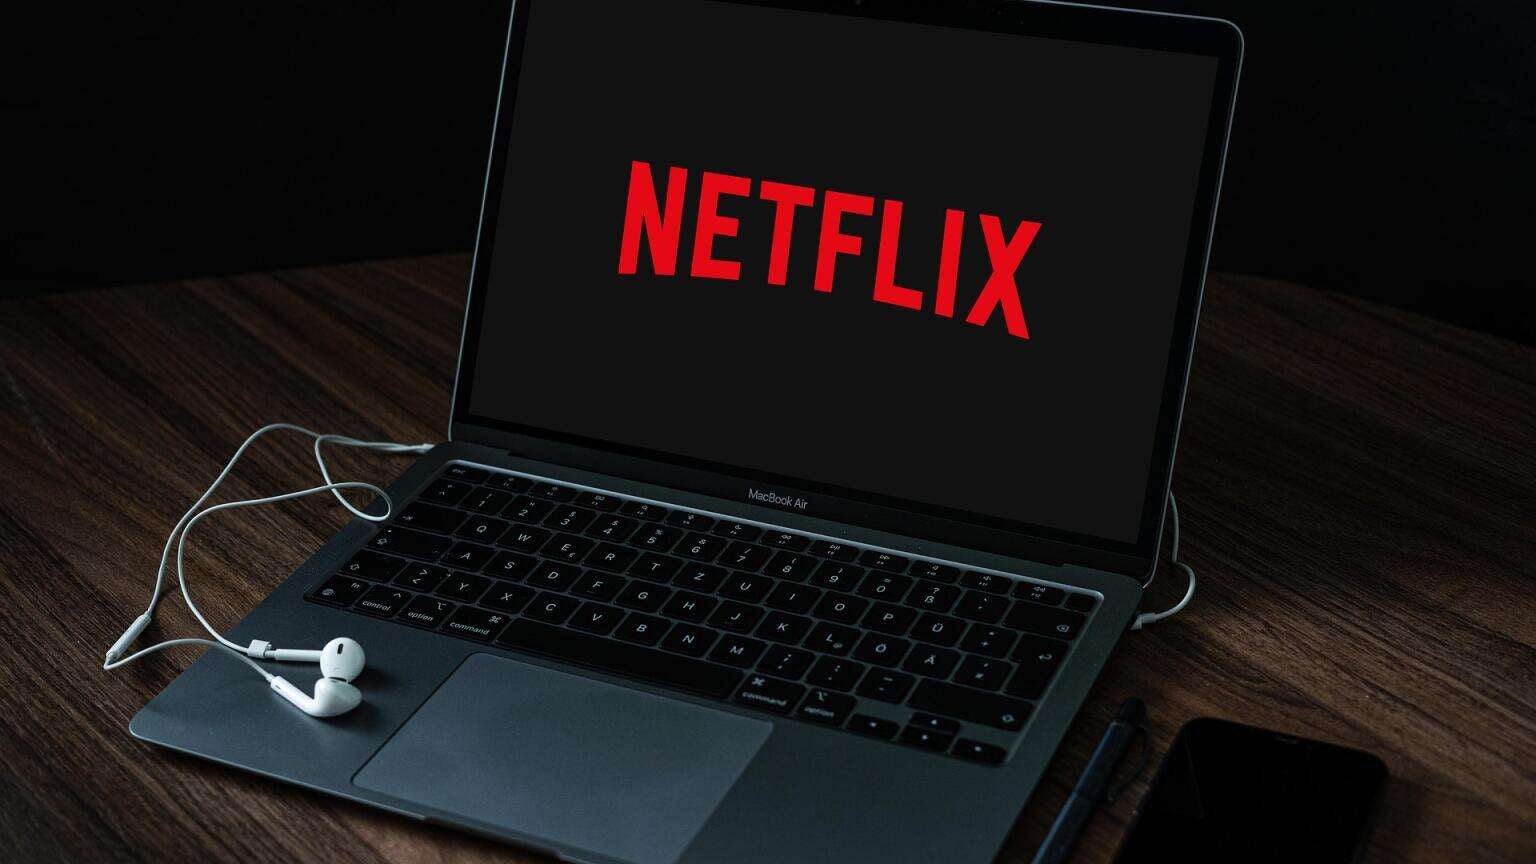 Analysis: Netflix Could Add $600M in Ad-Supported Revenue During First Year Alone